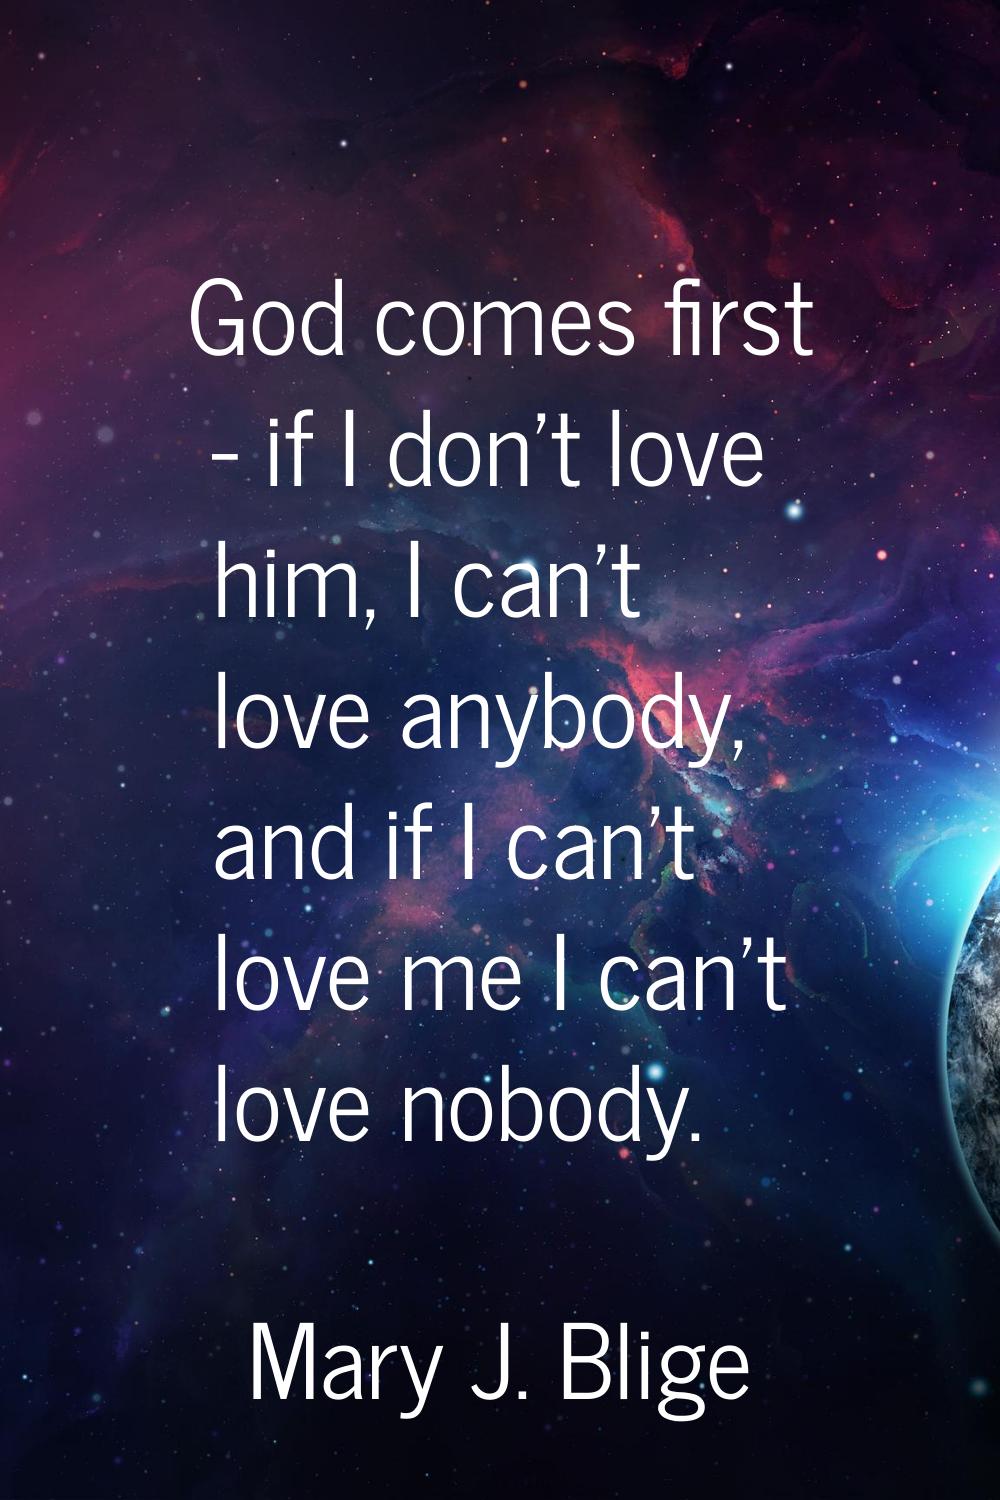 God comes first - if I don't love him, I can't love anybody, and if I can't love me I can't love no